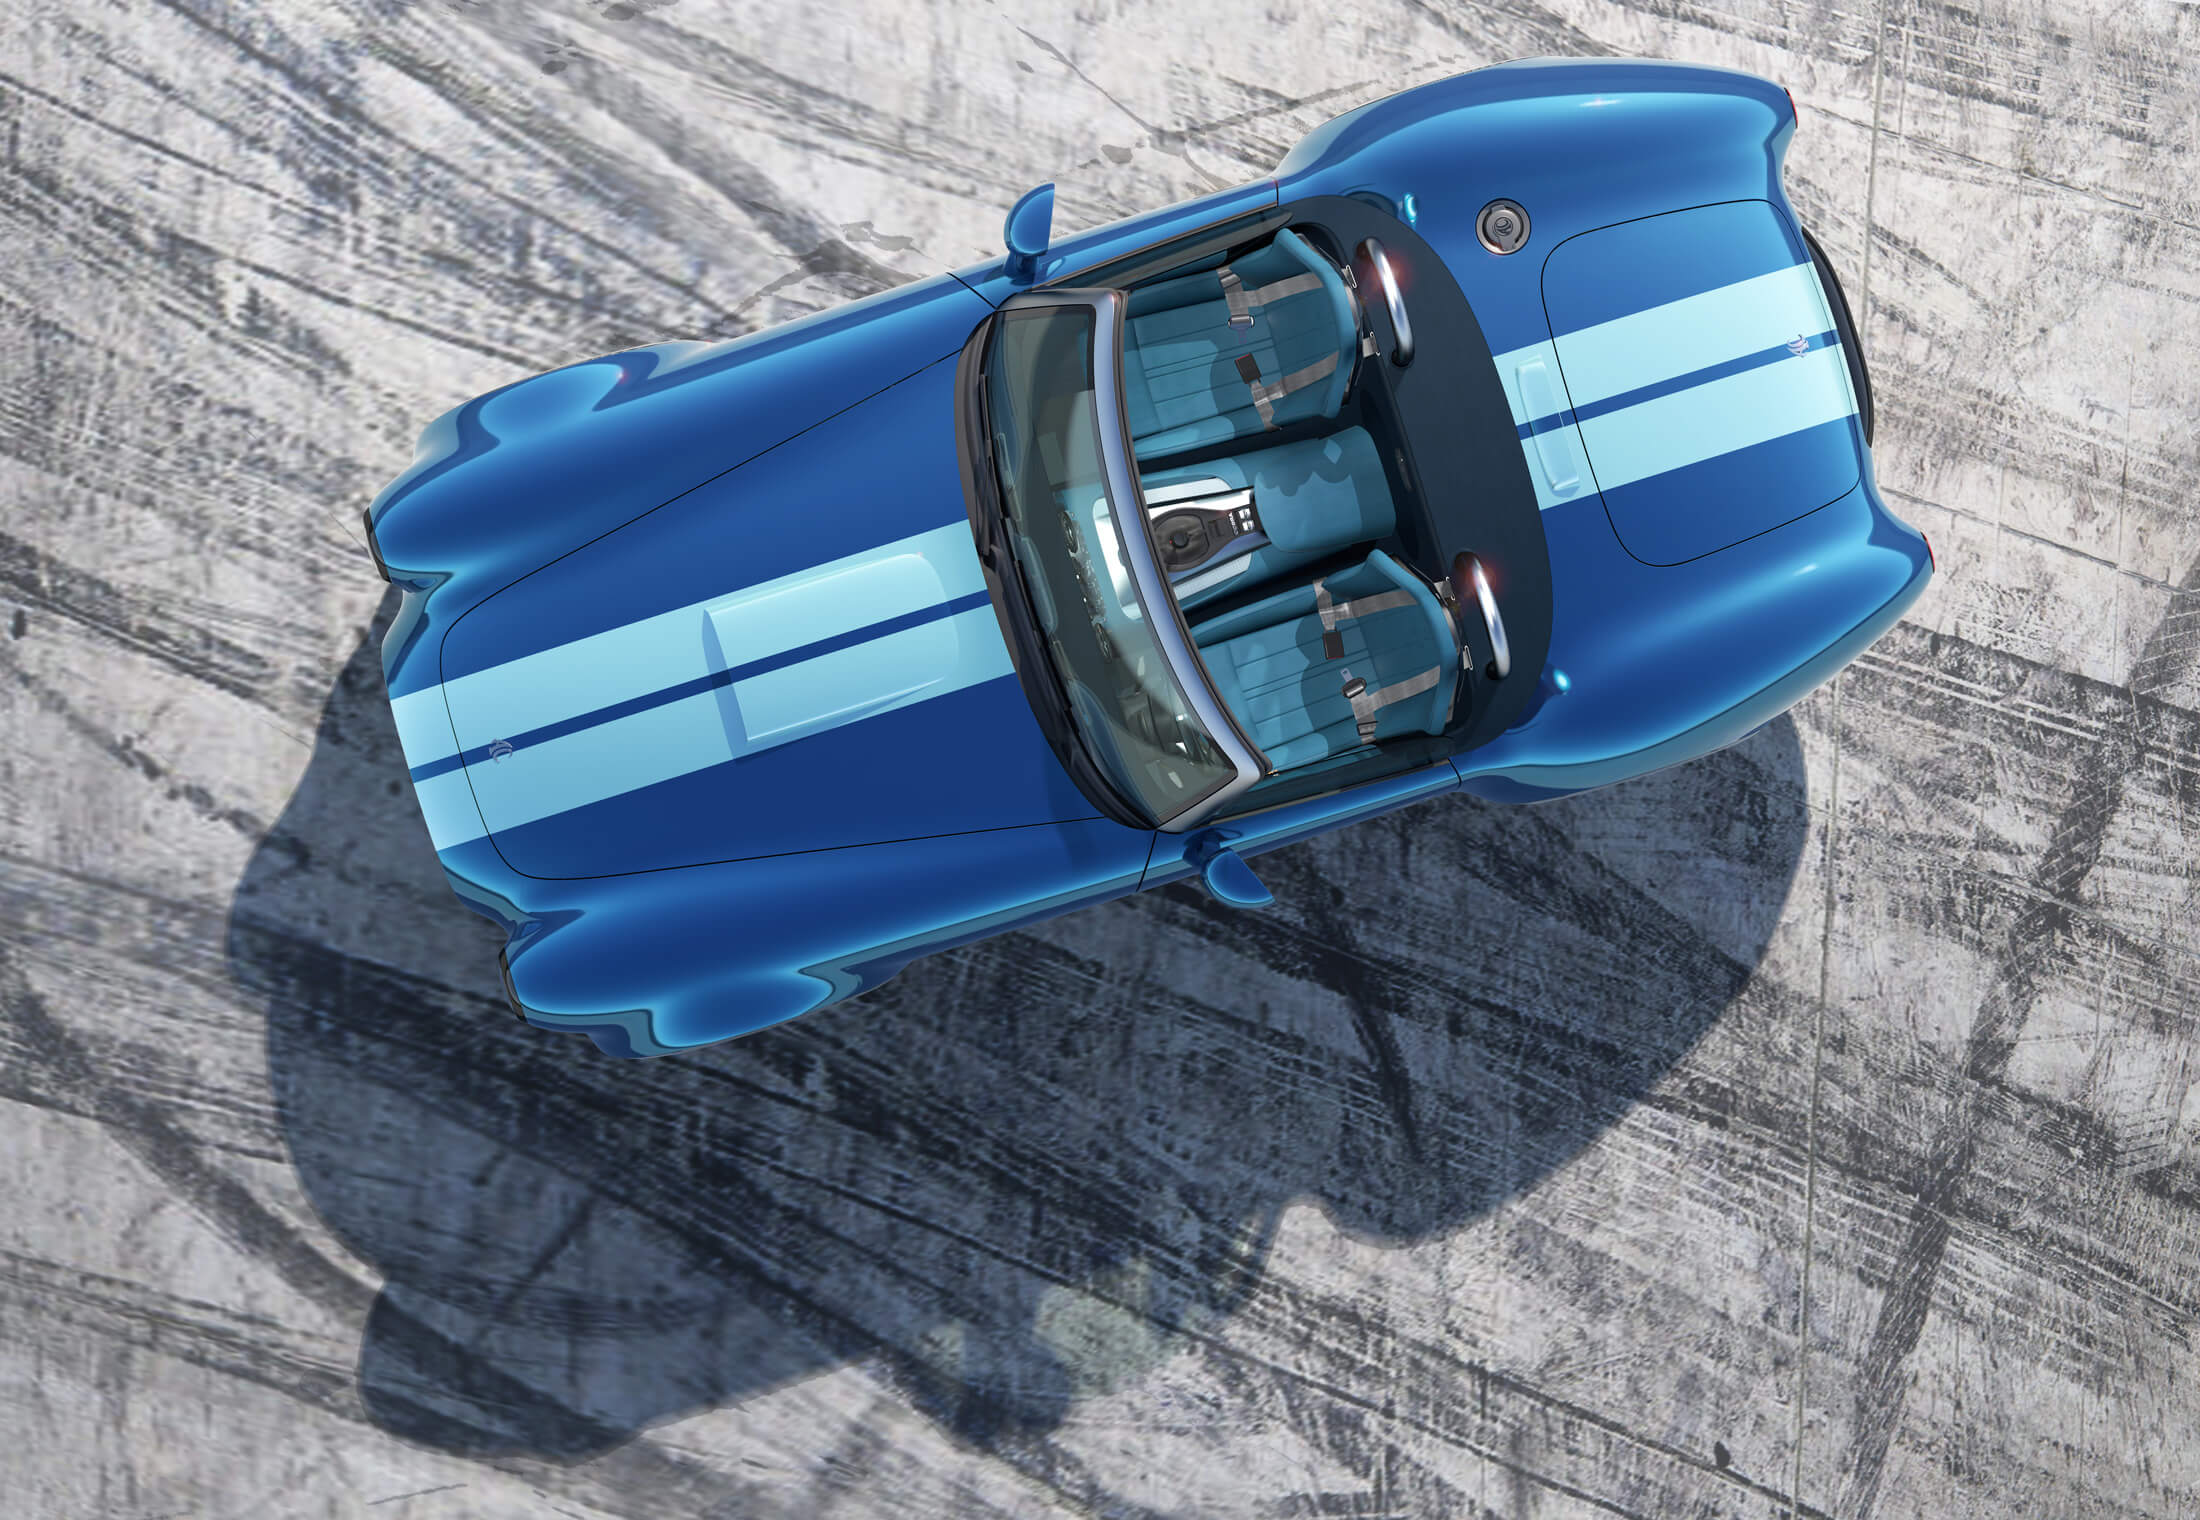 An overhead view of the upcoming AC Cobra GT roadster in blue with white stripes